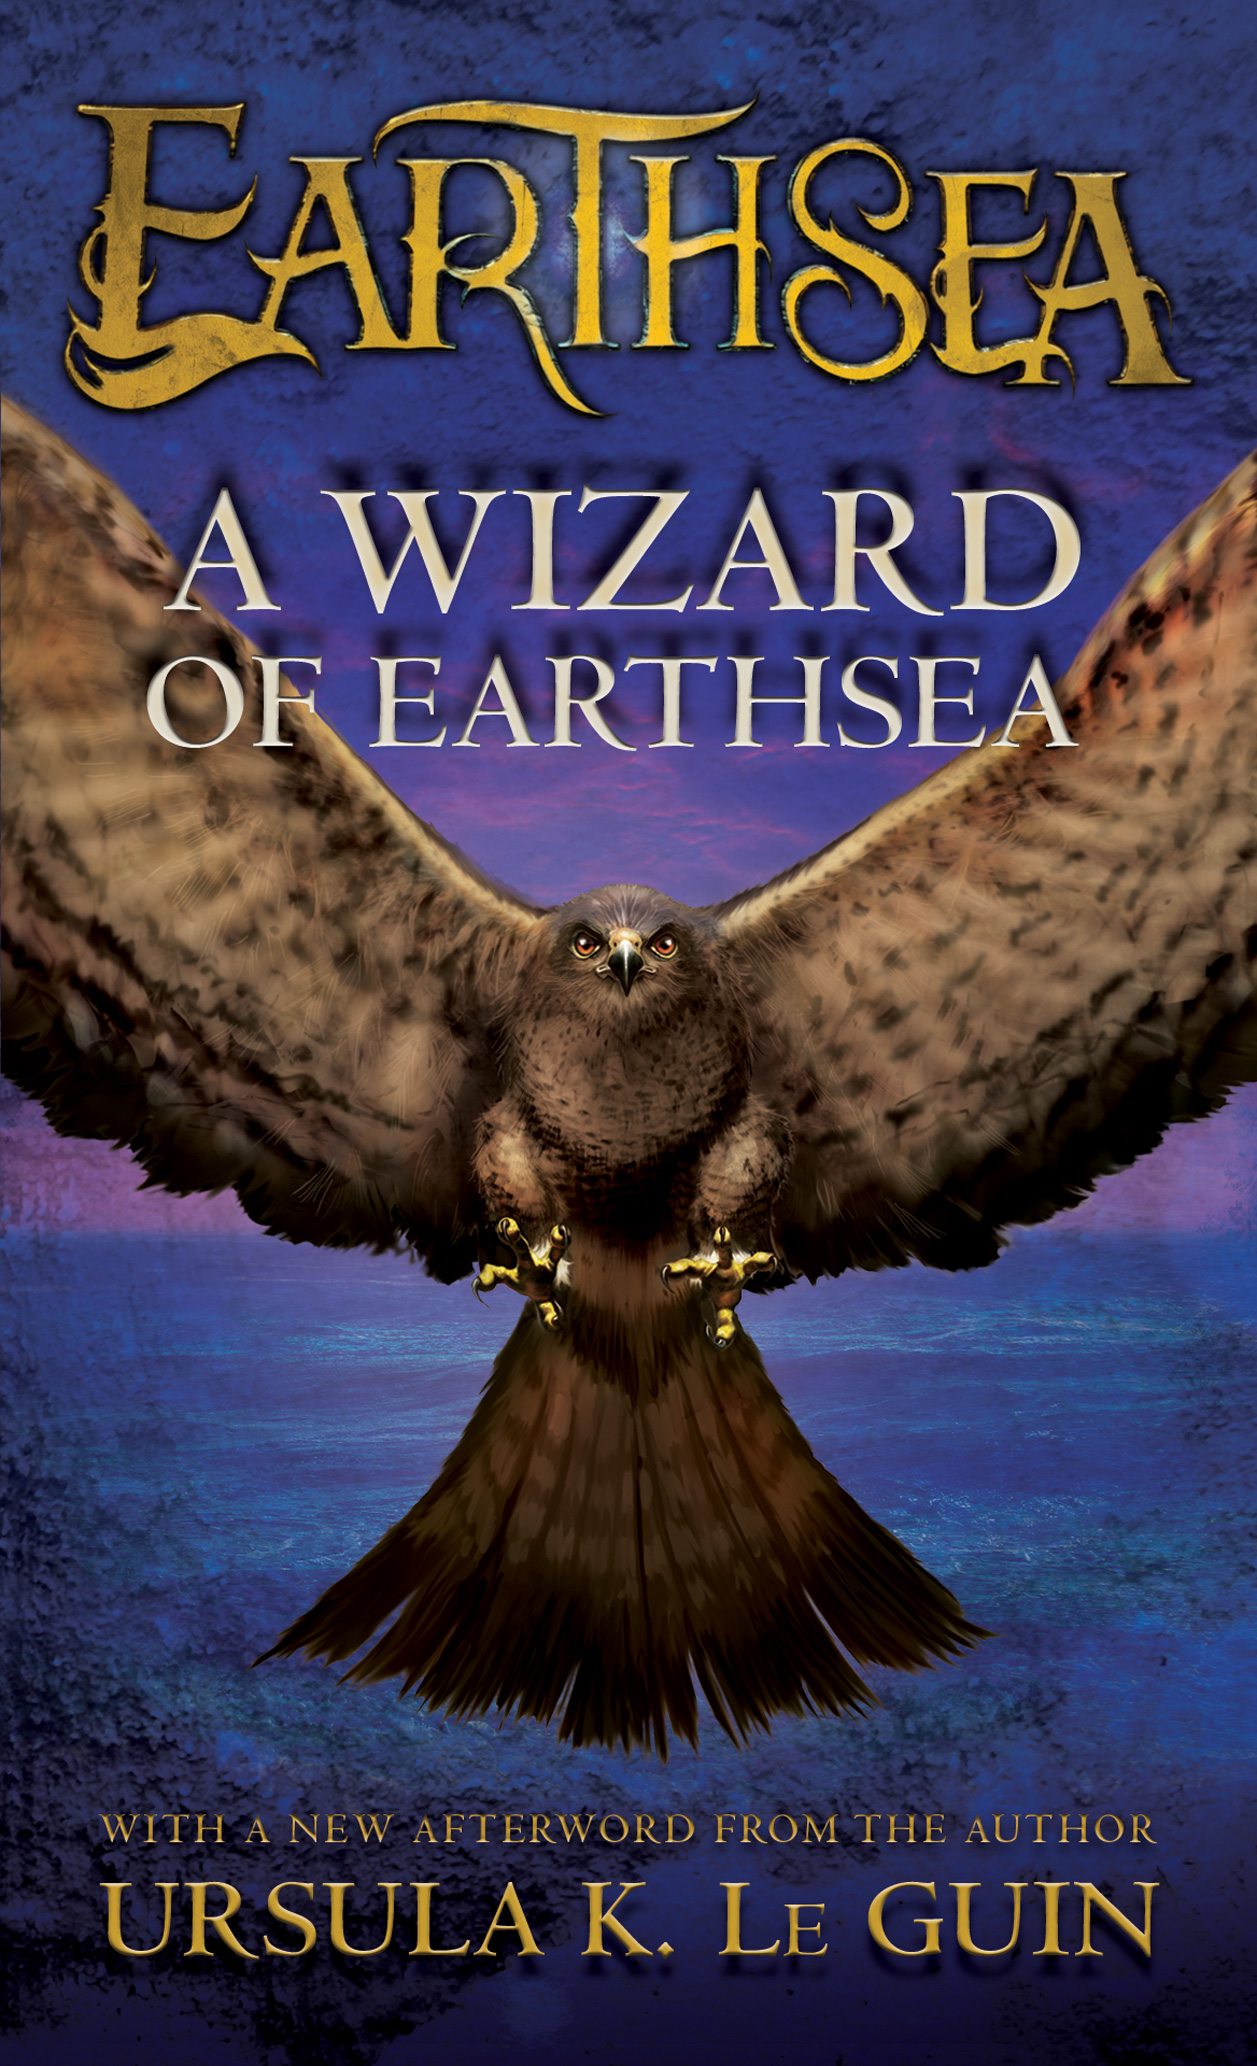 A+Wizard+of+Earthsea+%28Book+One+of+the+Earthsea+Cycle%29